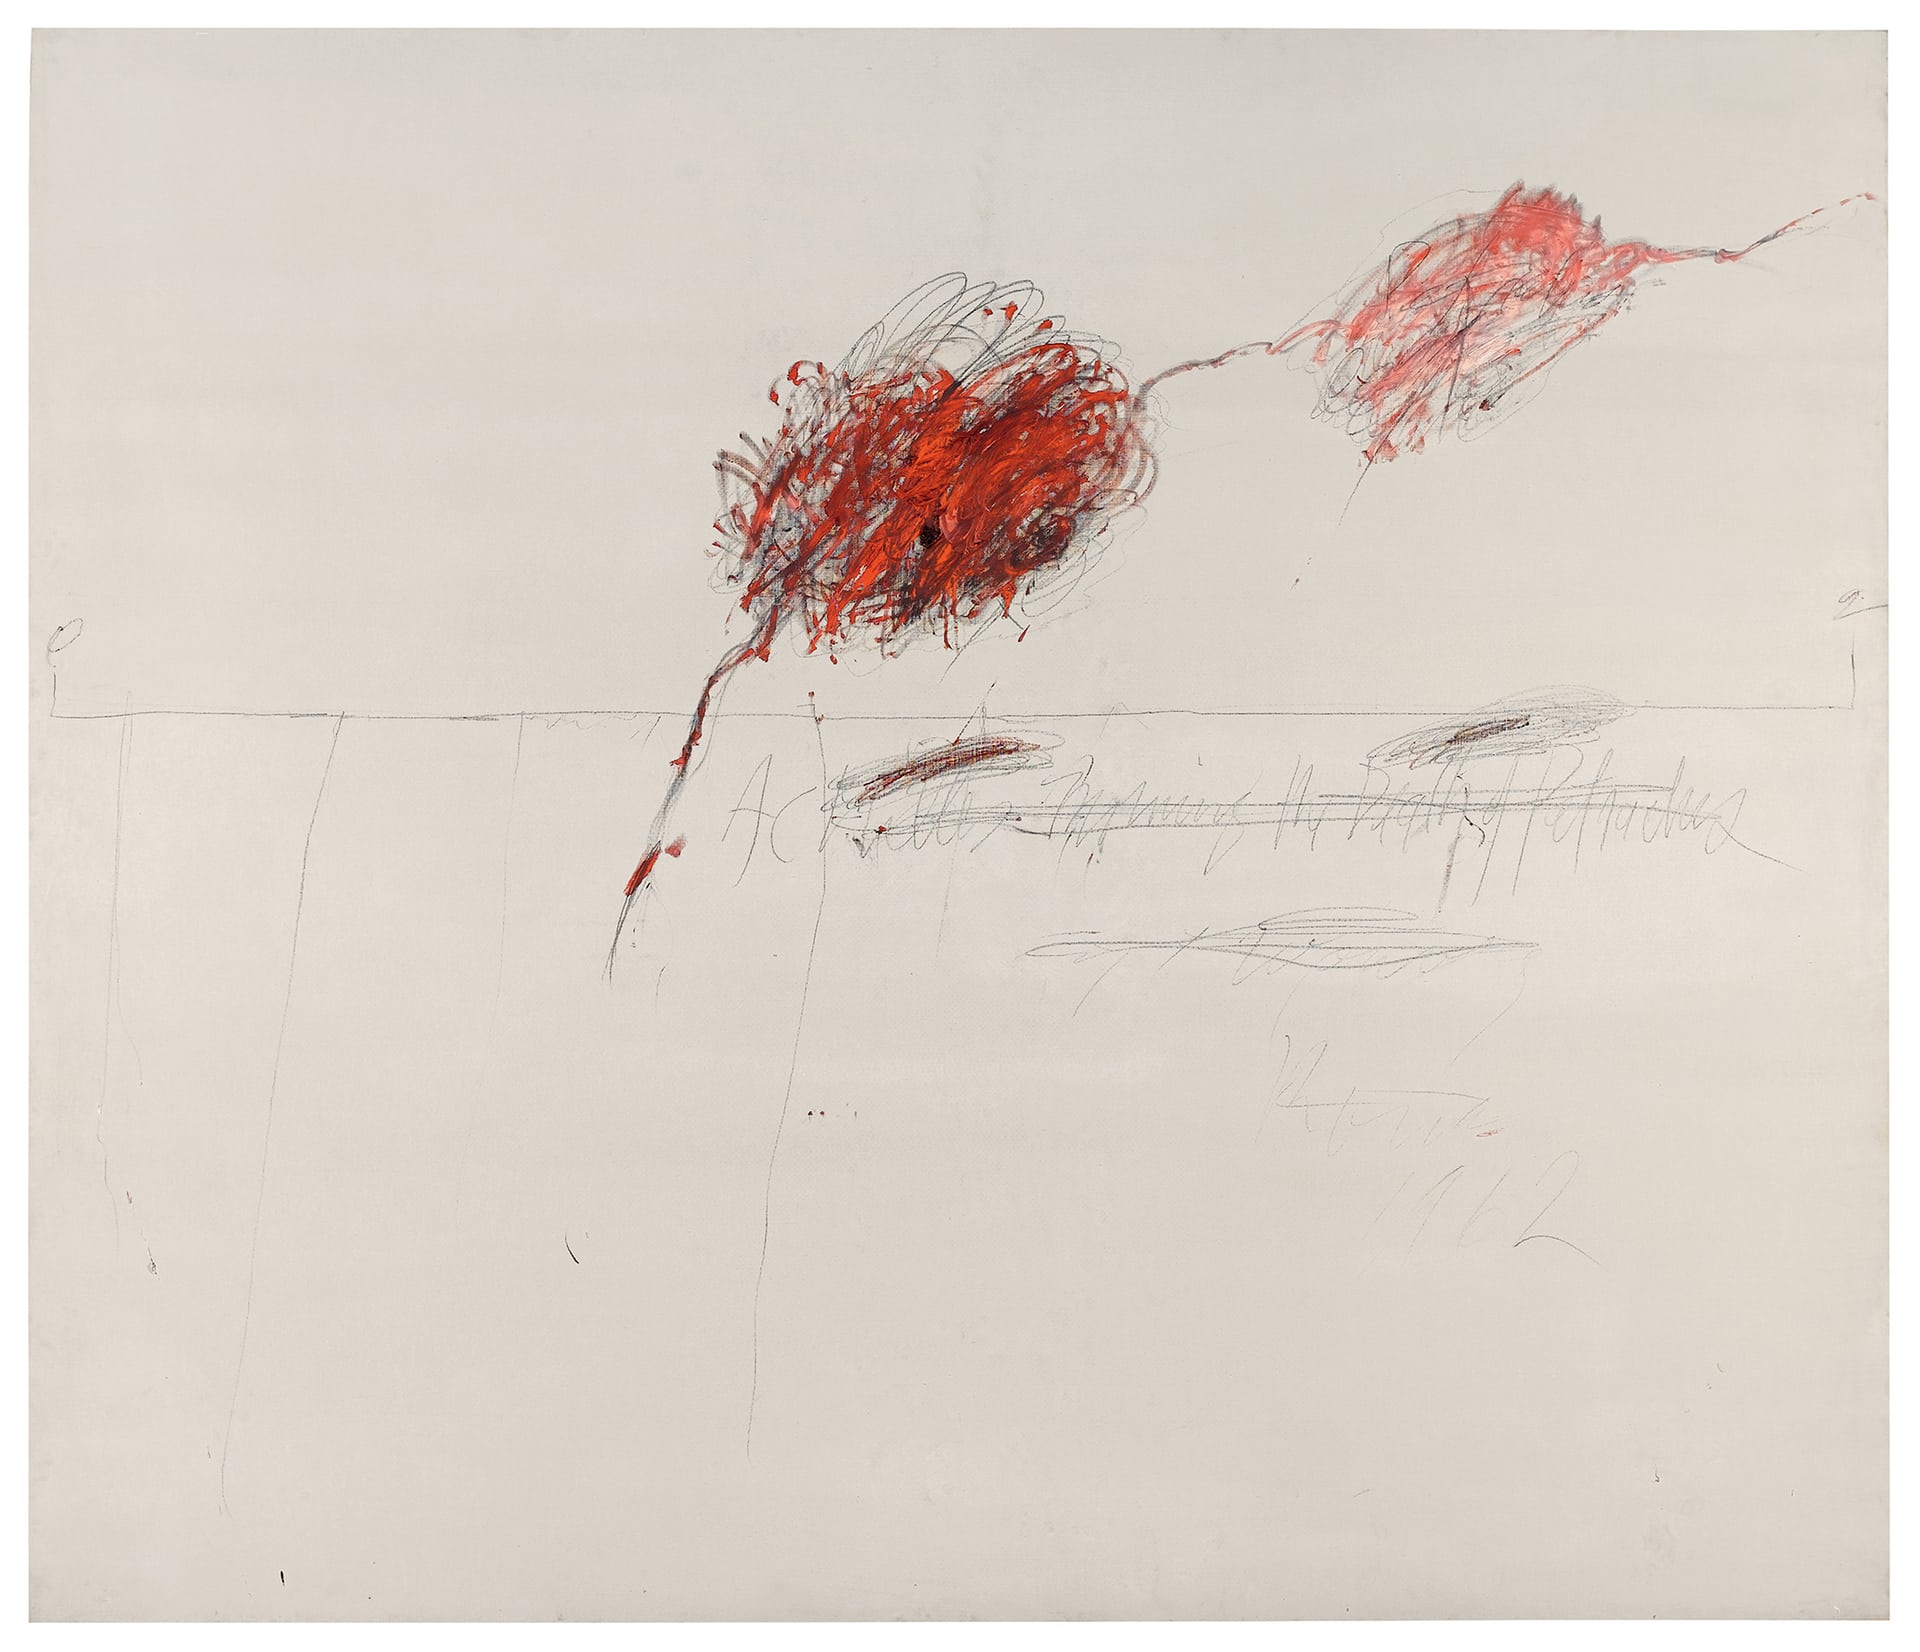 Cy Twombly's Achilles Mourning the Death of Patroclus (1962)